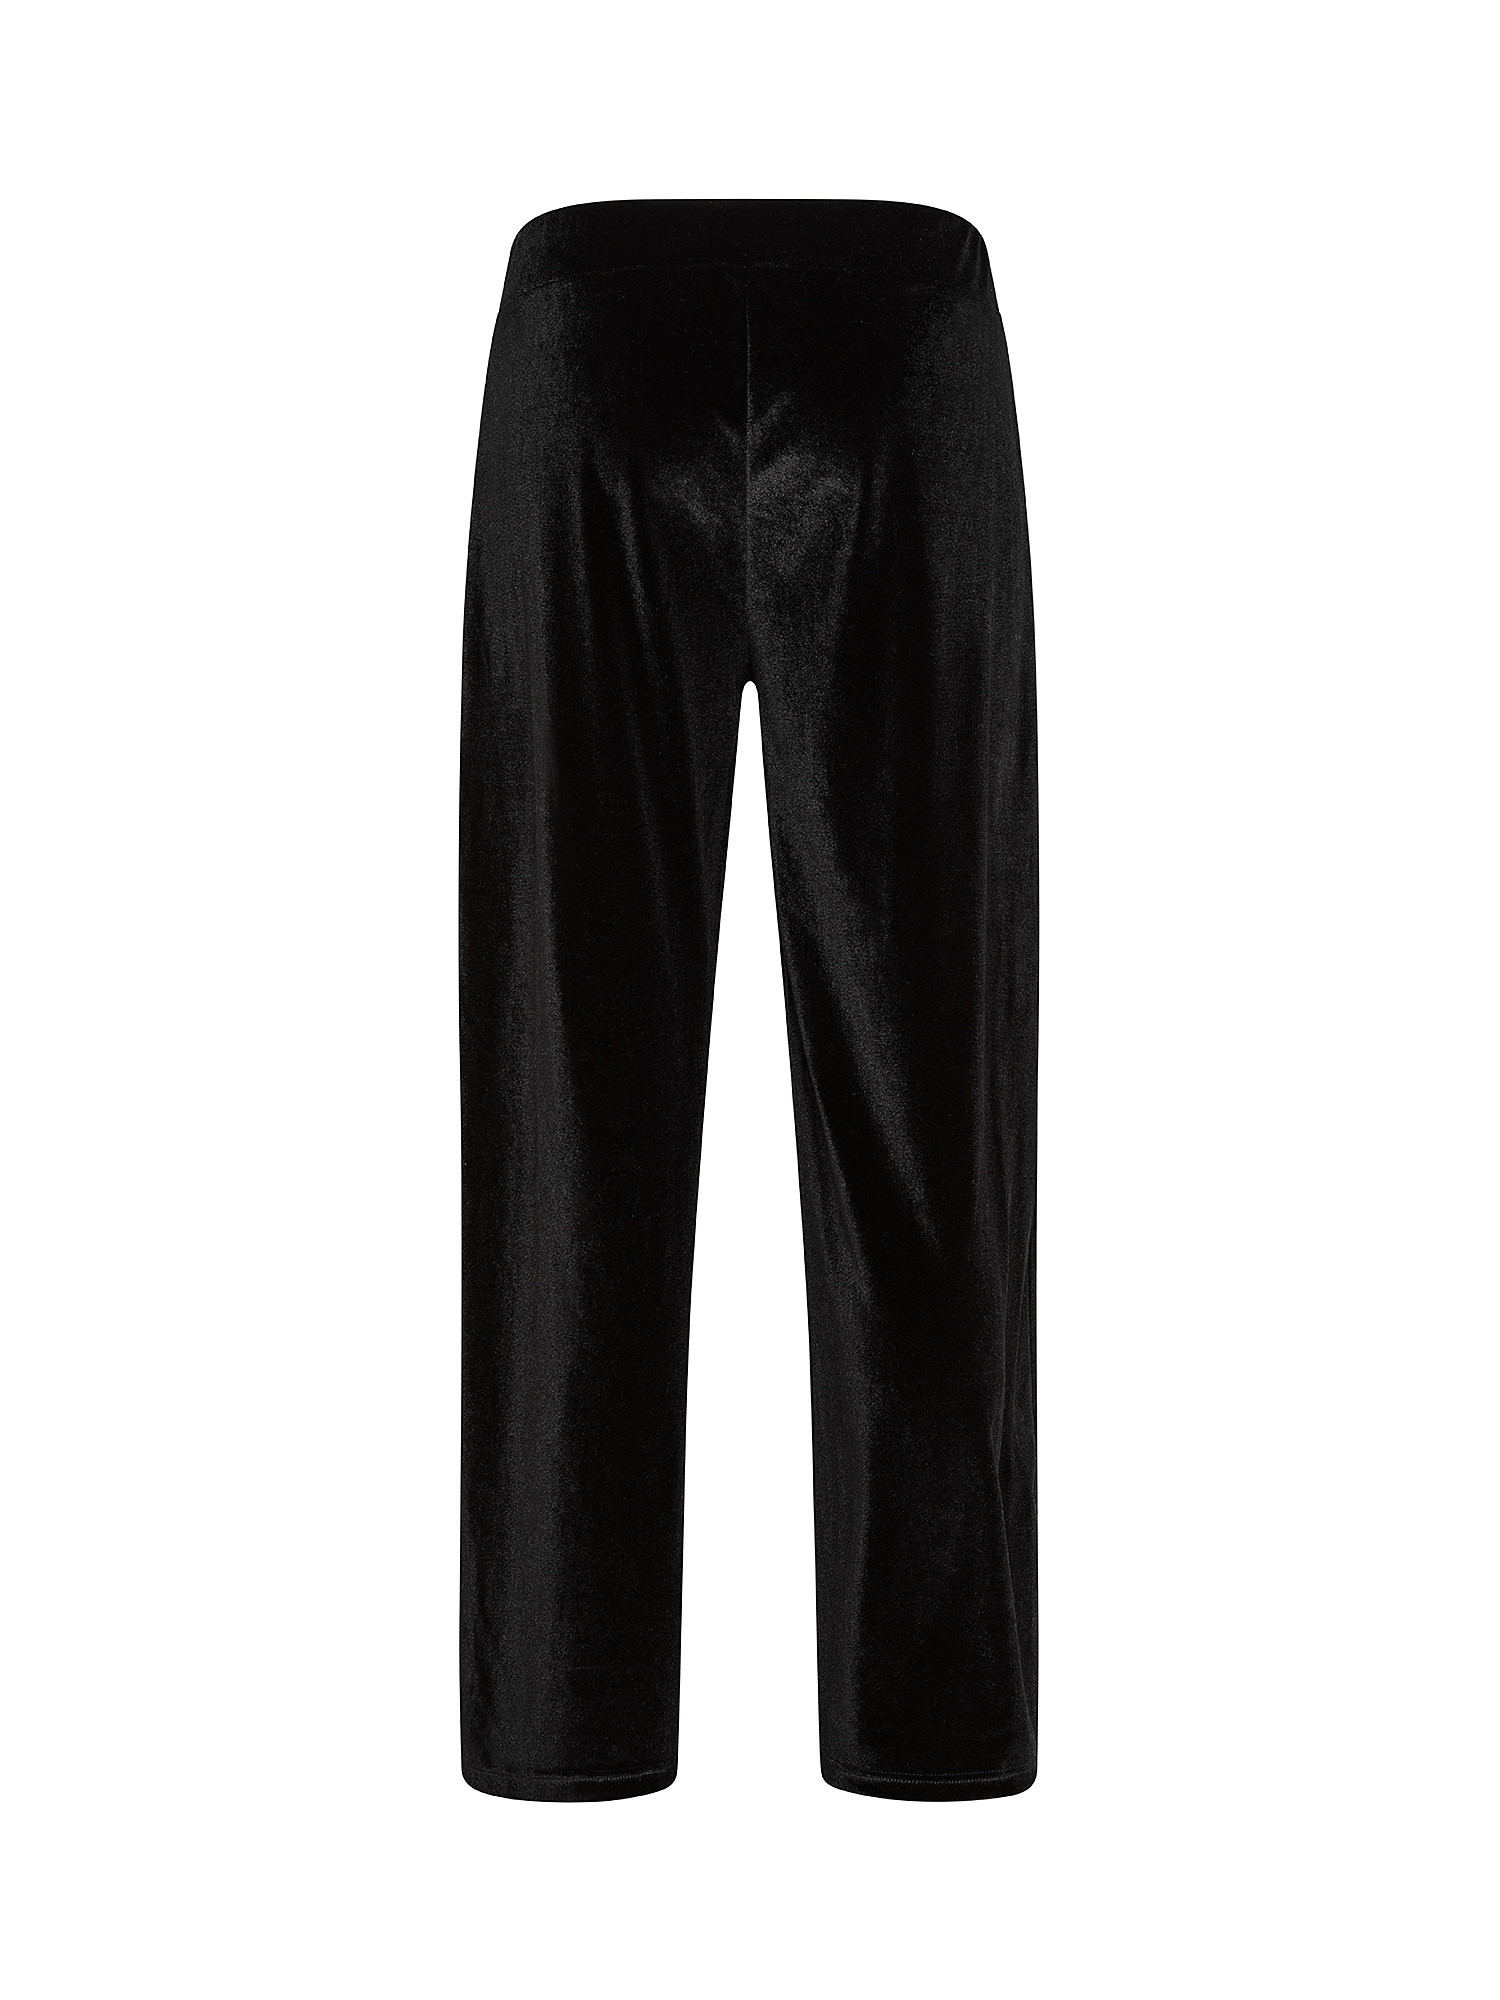 Chenille trousers, Black, large image number 1